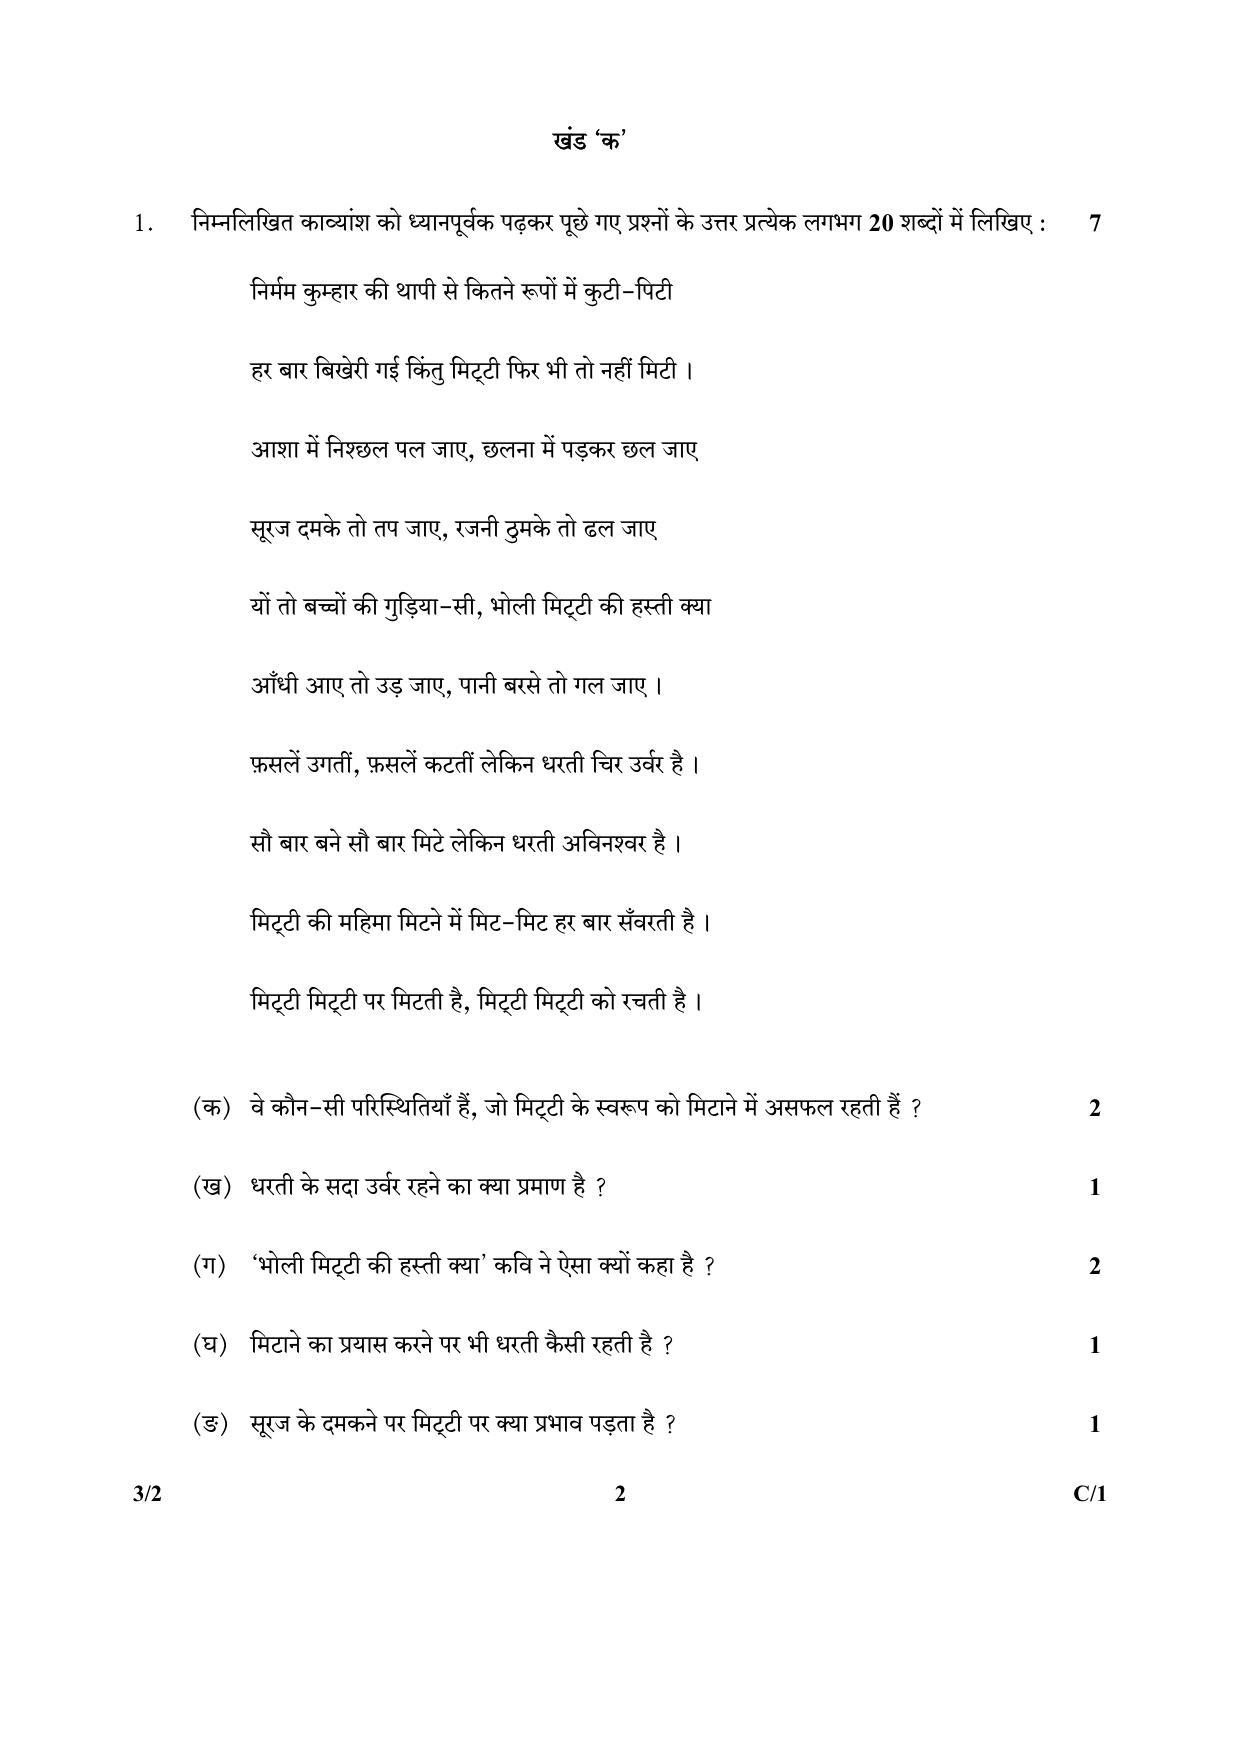 CBSE Class 10 3-2_Hindi 2018 Compartment Question Paper - Page 2